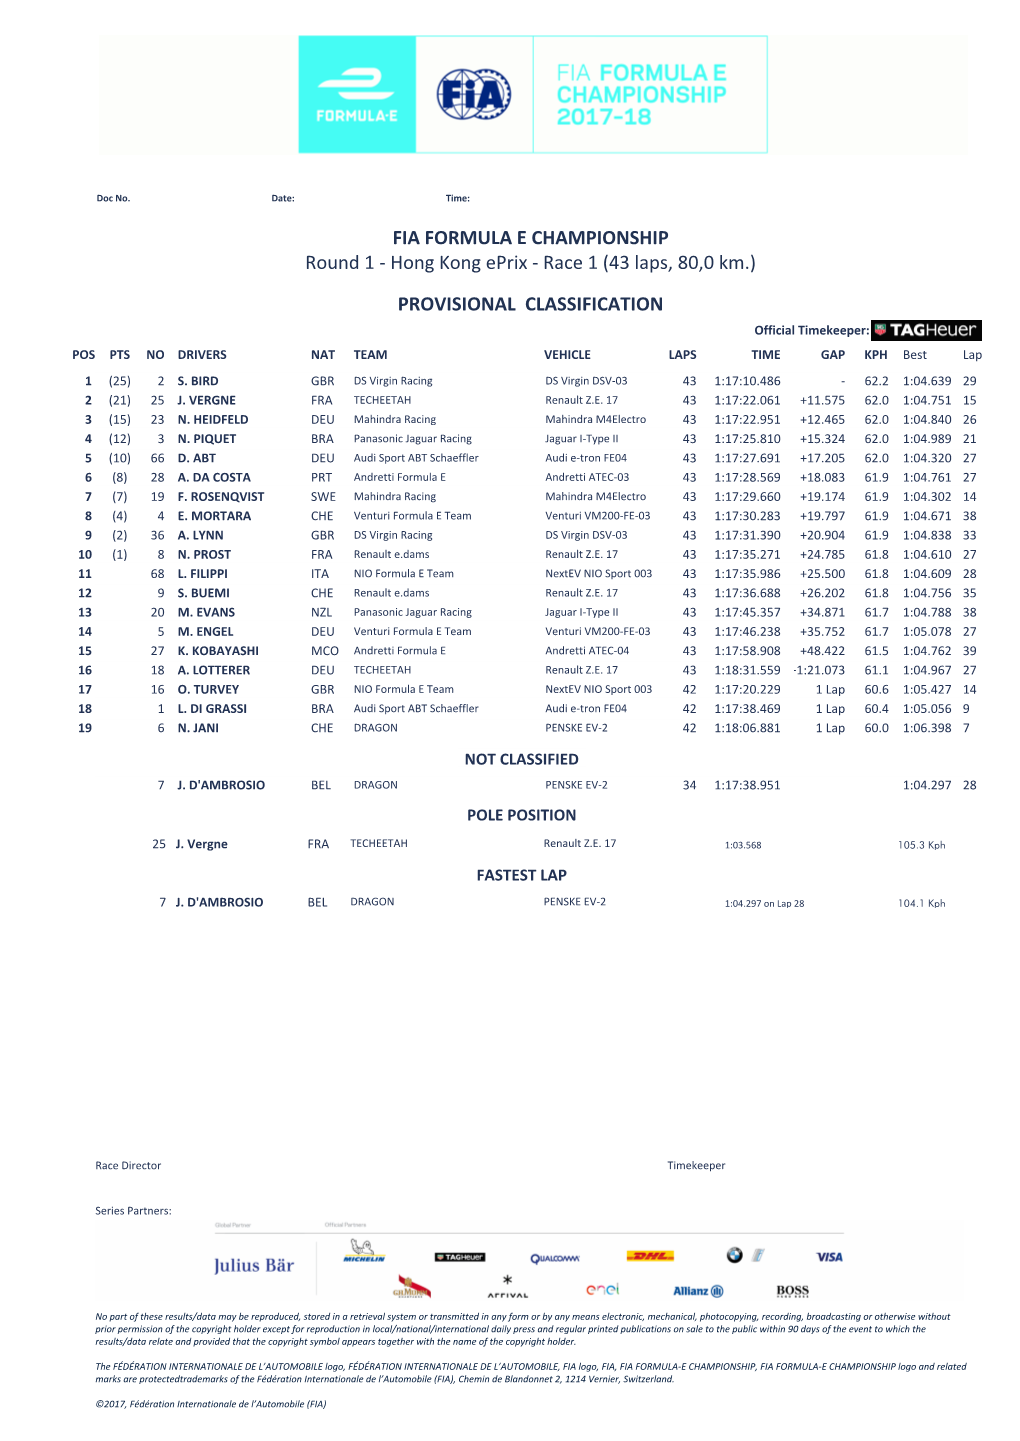 PROVISIONAL CLASSIFICATION Round 1